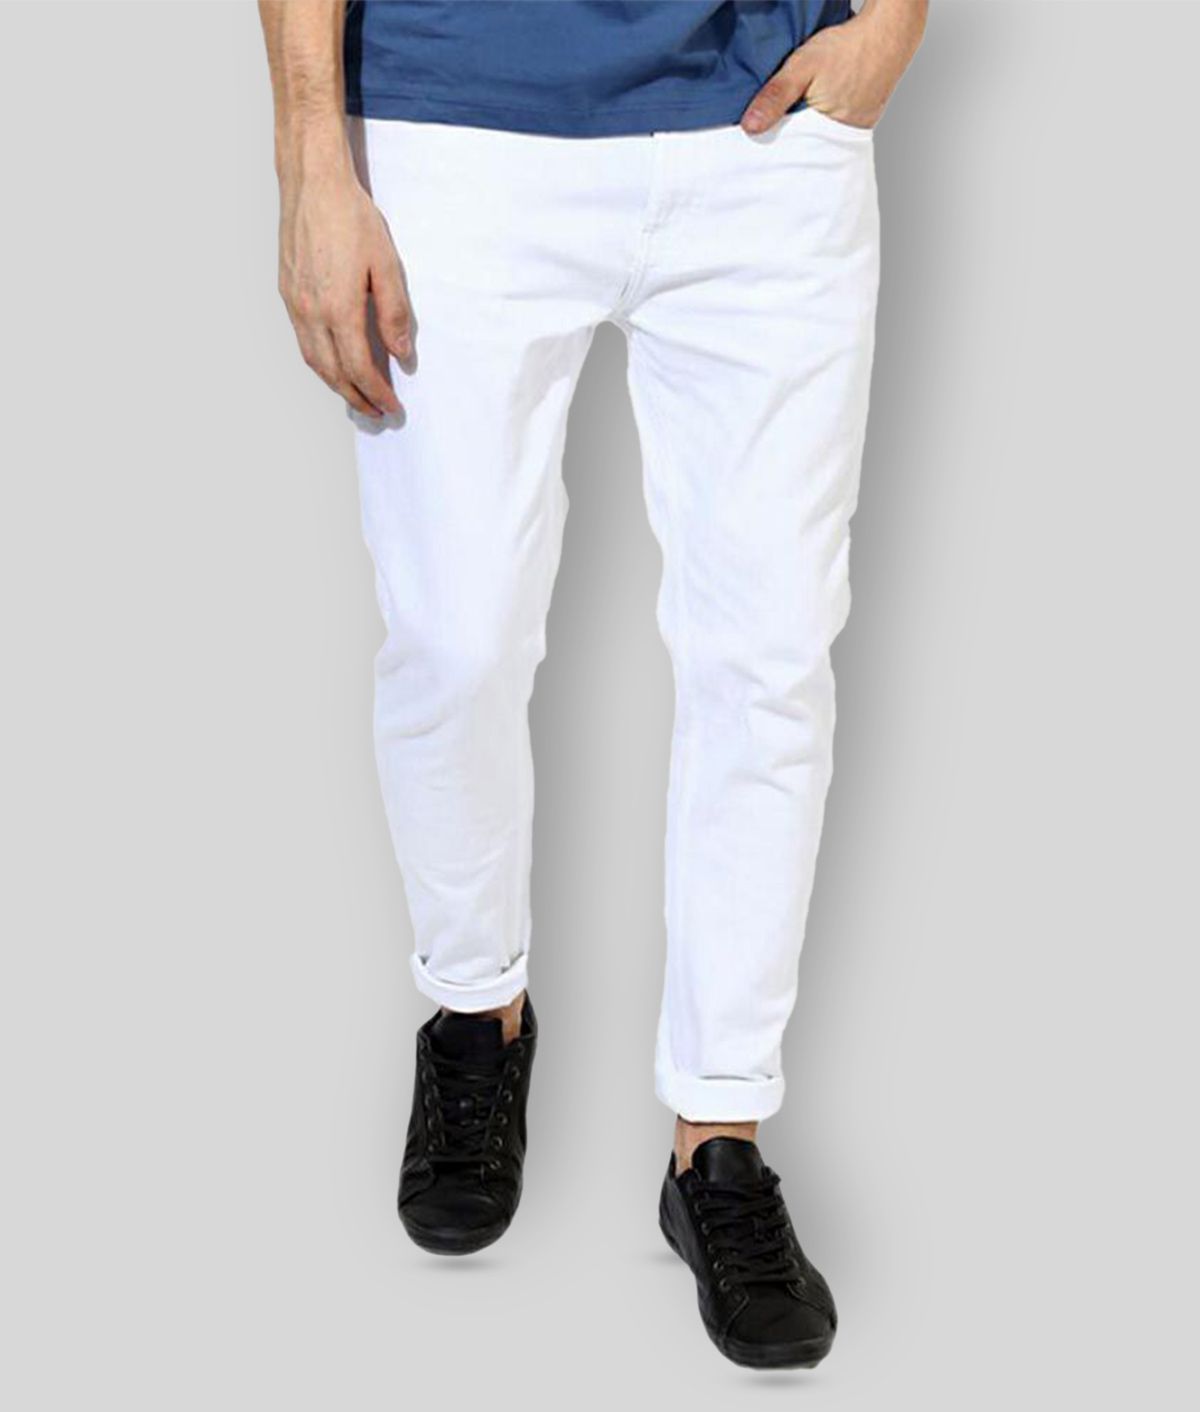     			Lawson - White 100% Cotton Skinny Fit Men's Jeans ( Pack of 1 )